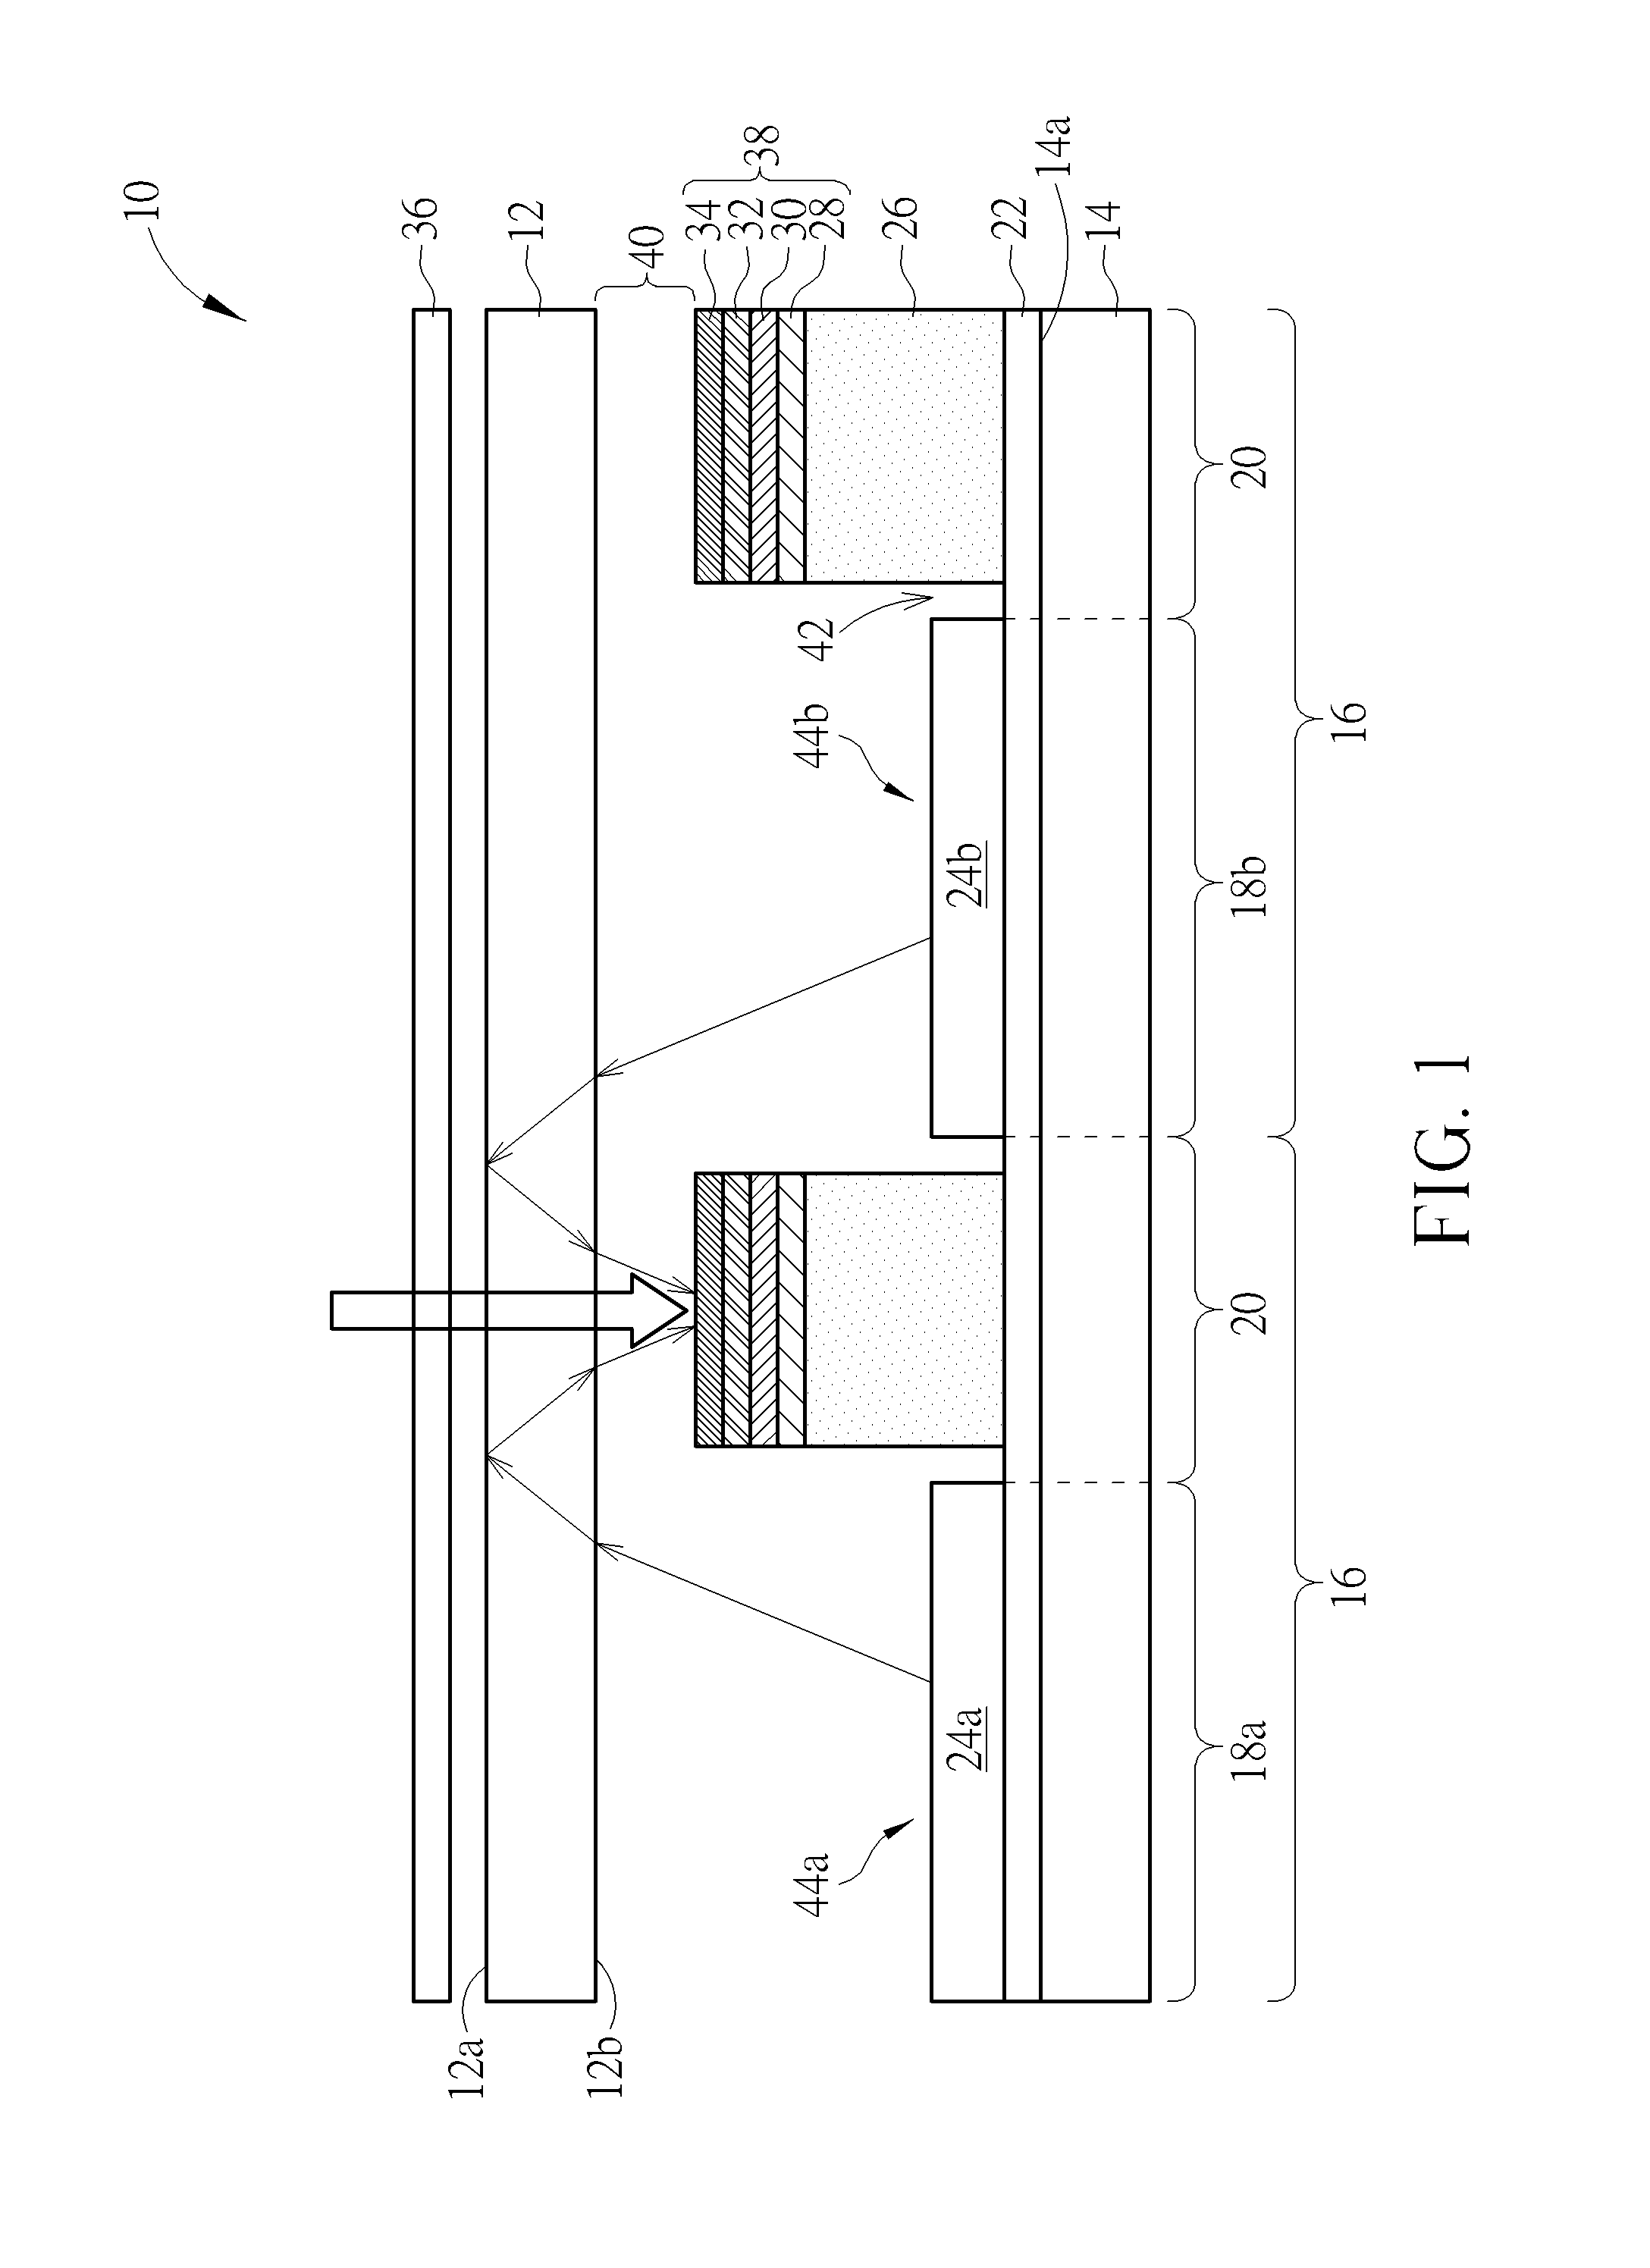 Organic light-emitting display with solar cell